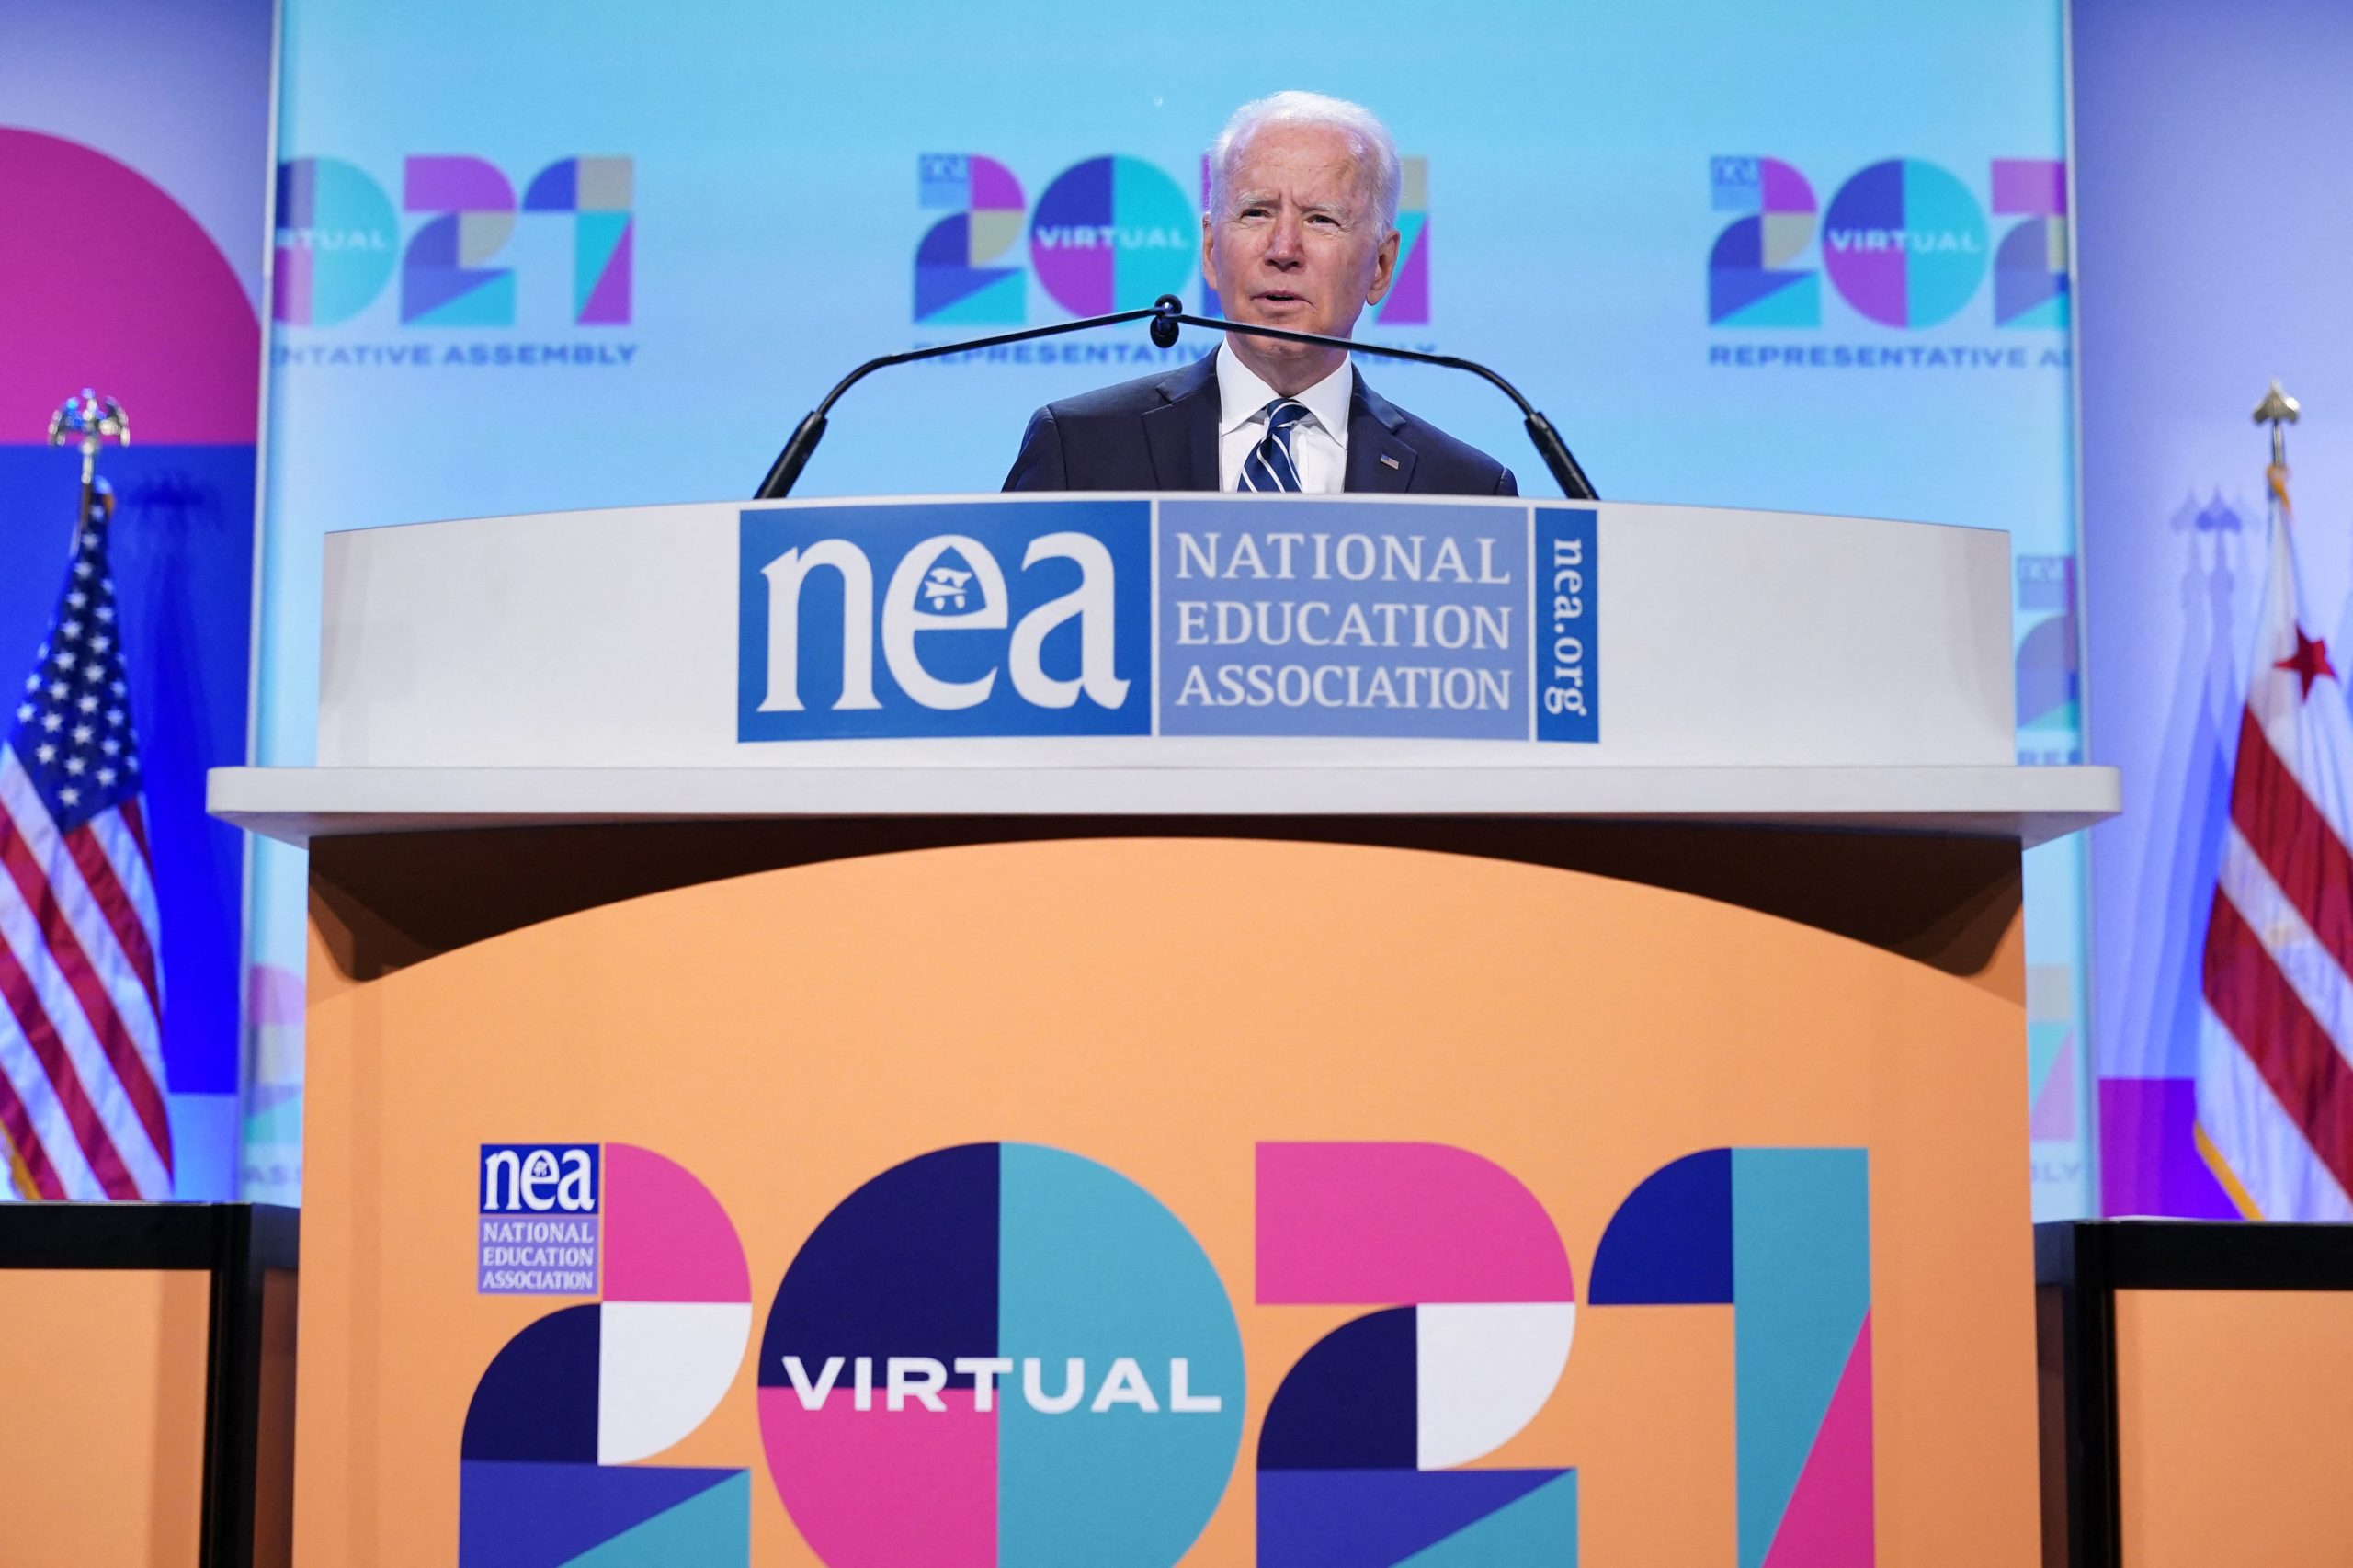 US President Joe Biden addresses the National Education Association's Annual Meeting and Representative Assembly in the Walter E. Washington Convention Center in Washington, DC on July 2, 2021. (Photo by MANDEL NGAN / AFP) (Photo by MANDEL NGAN/AFP via Getty Images)